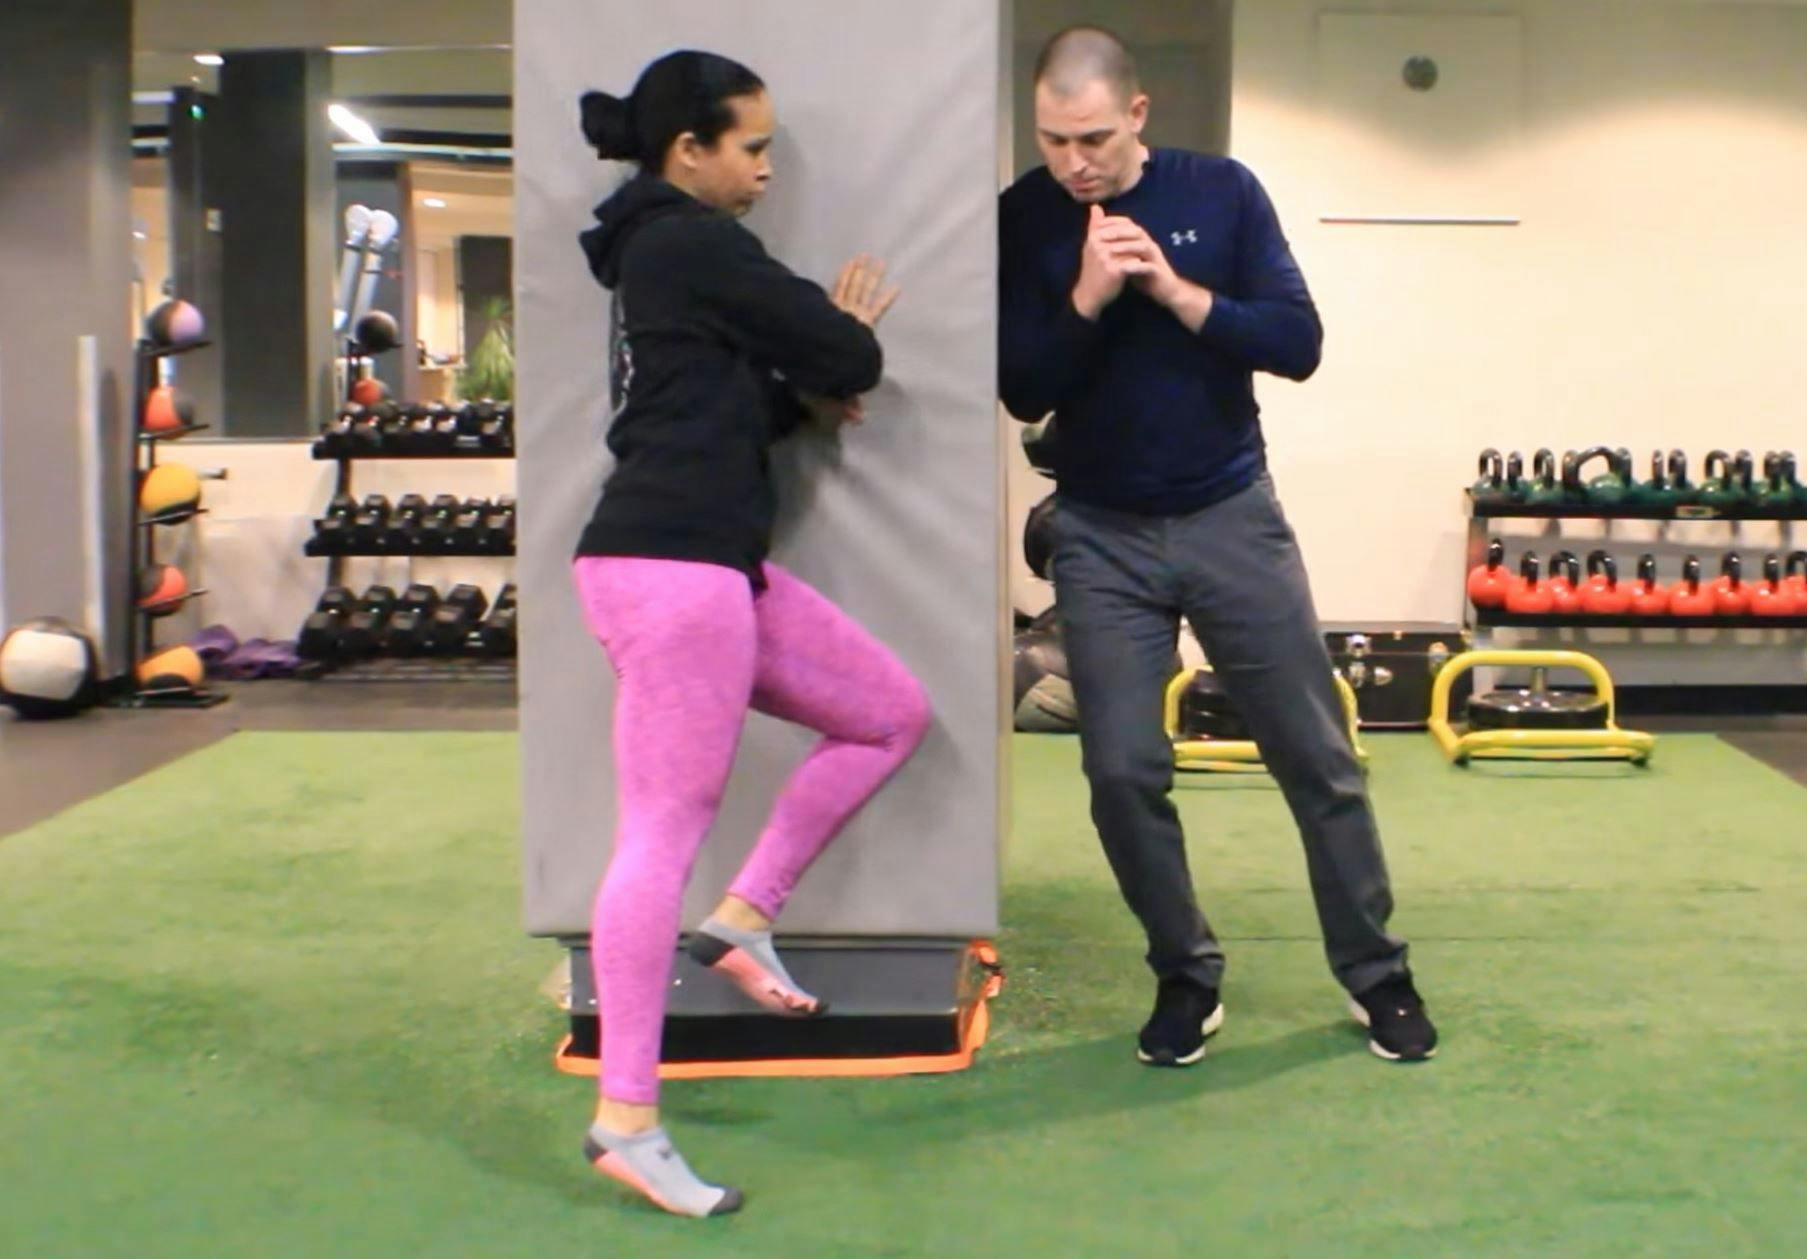 Dr. Brookbush teaches tibialis posterior activation progressions as part of a corrective exercise warm-up for a female athlete completing her human movement certification.